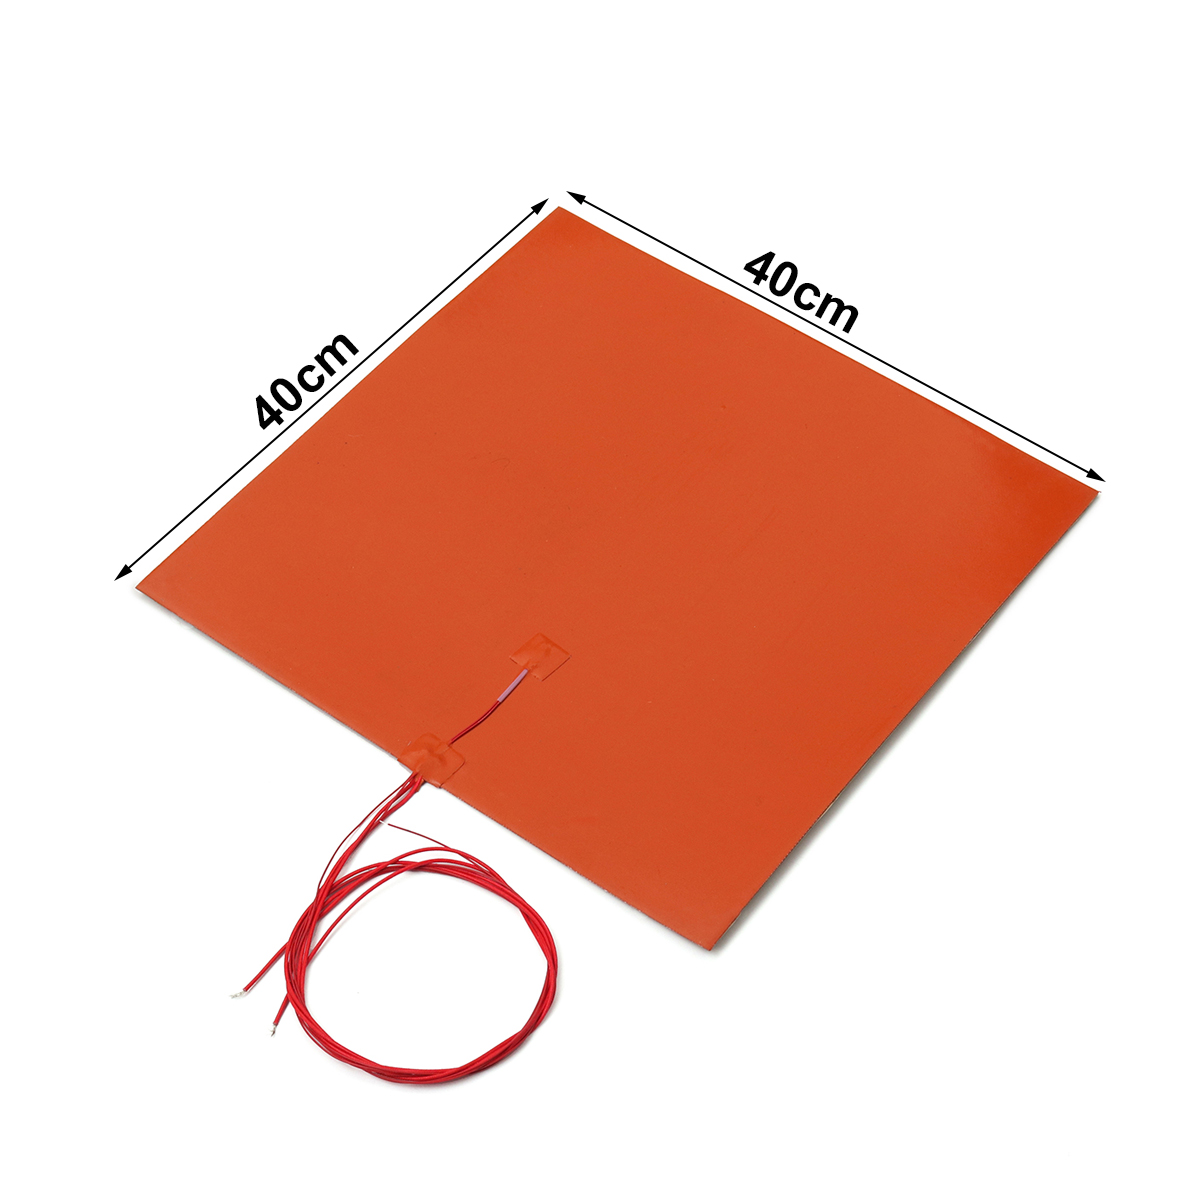 1400w 240V 400*400mm Silicone Heater Bed Pad For 3D Printer Without Hole 7